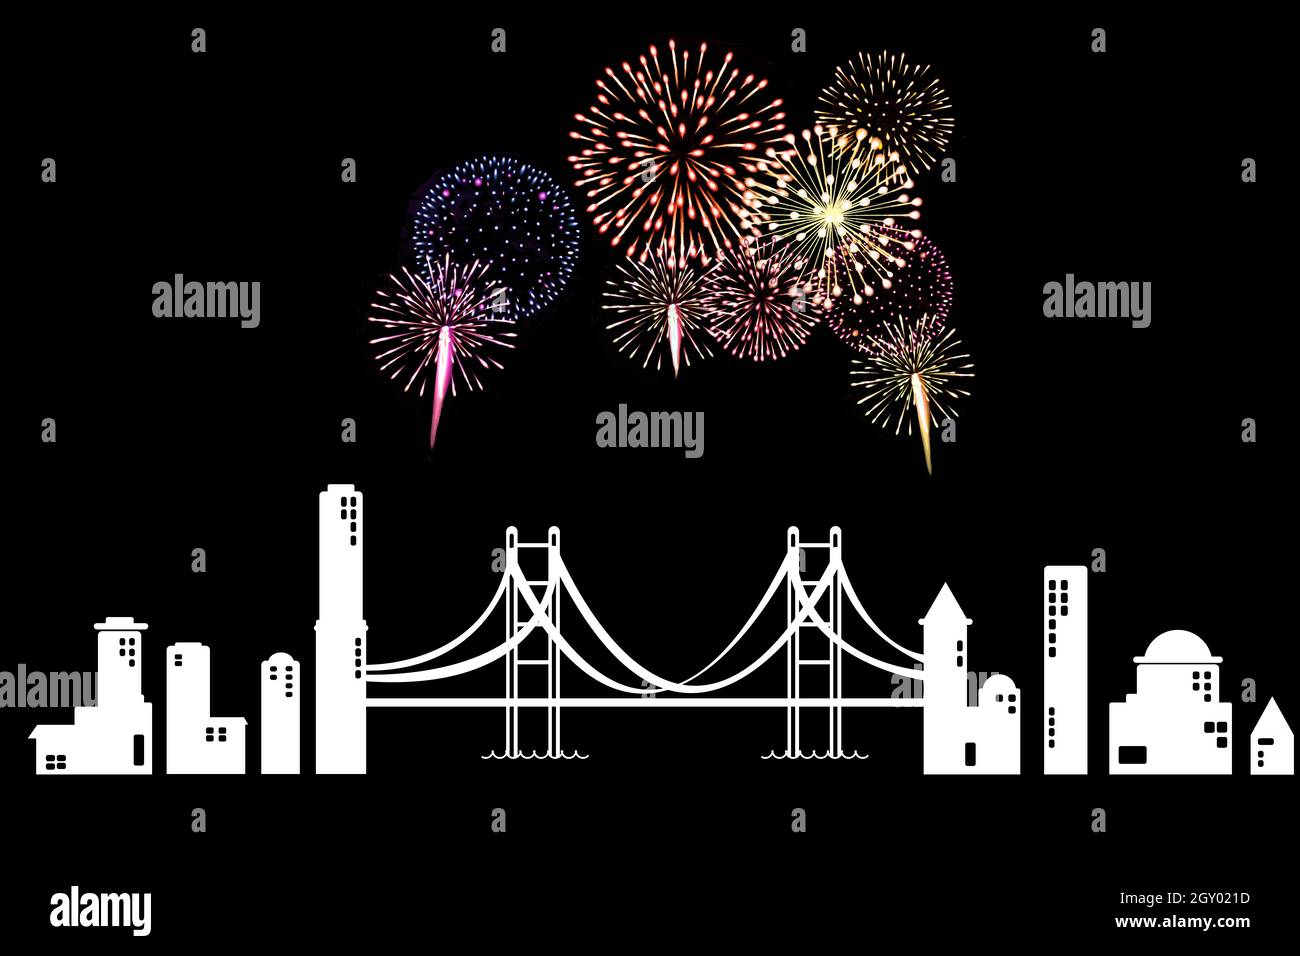 Merry Christmas & Happy New Year design fireworks in the city. Stock Photo